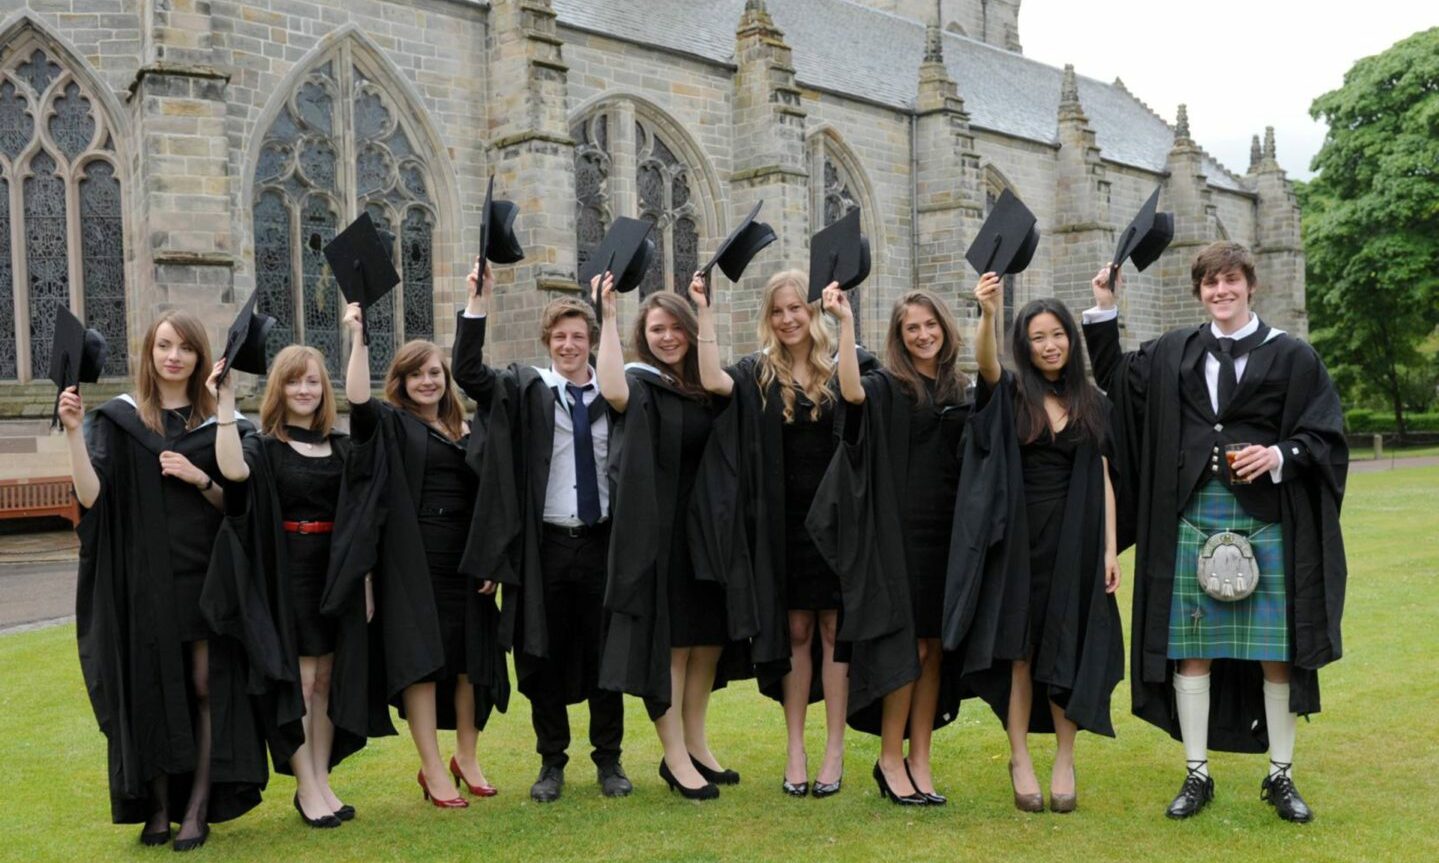 Law graduates celebrate their graduation in the Aberdeen University grounds in 2013. Picture by Kath Flannery/DCT Media.